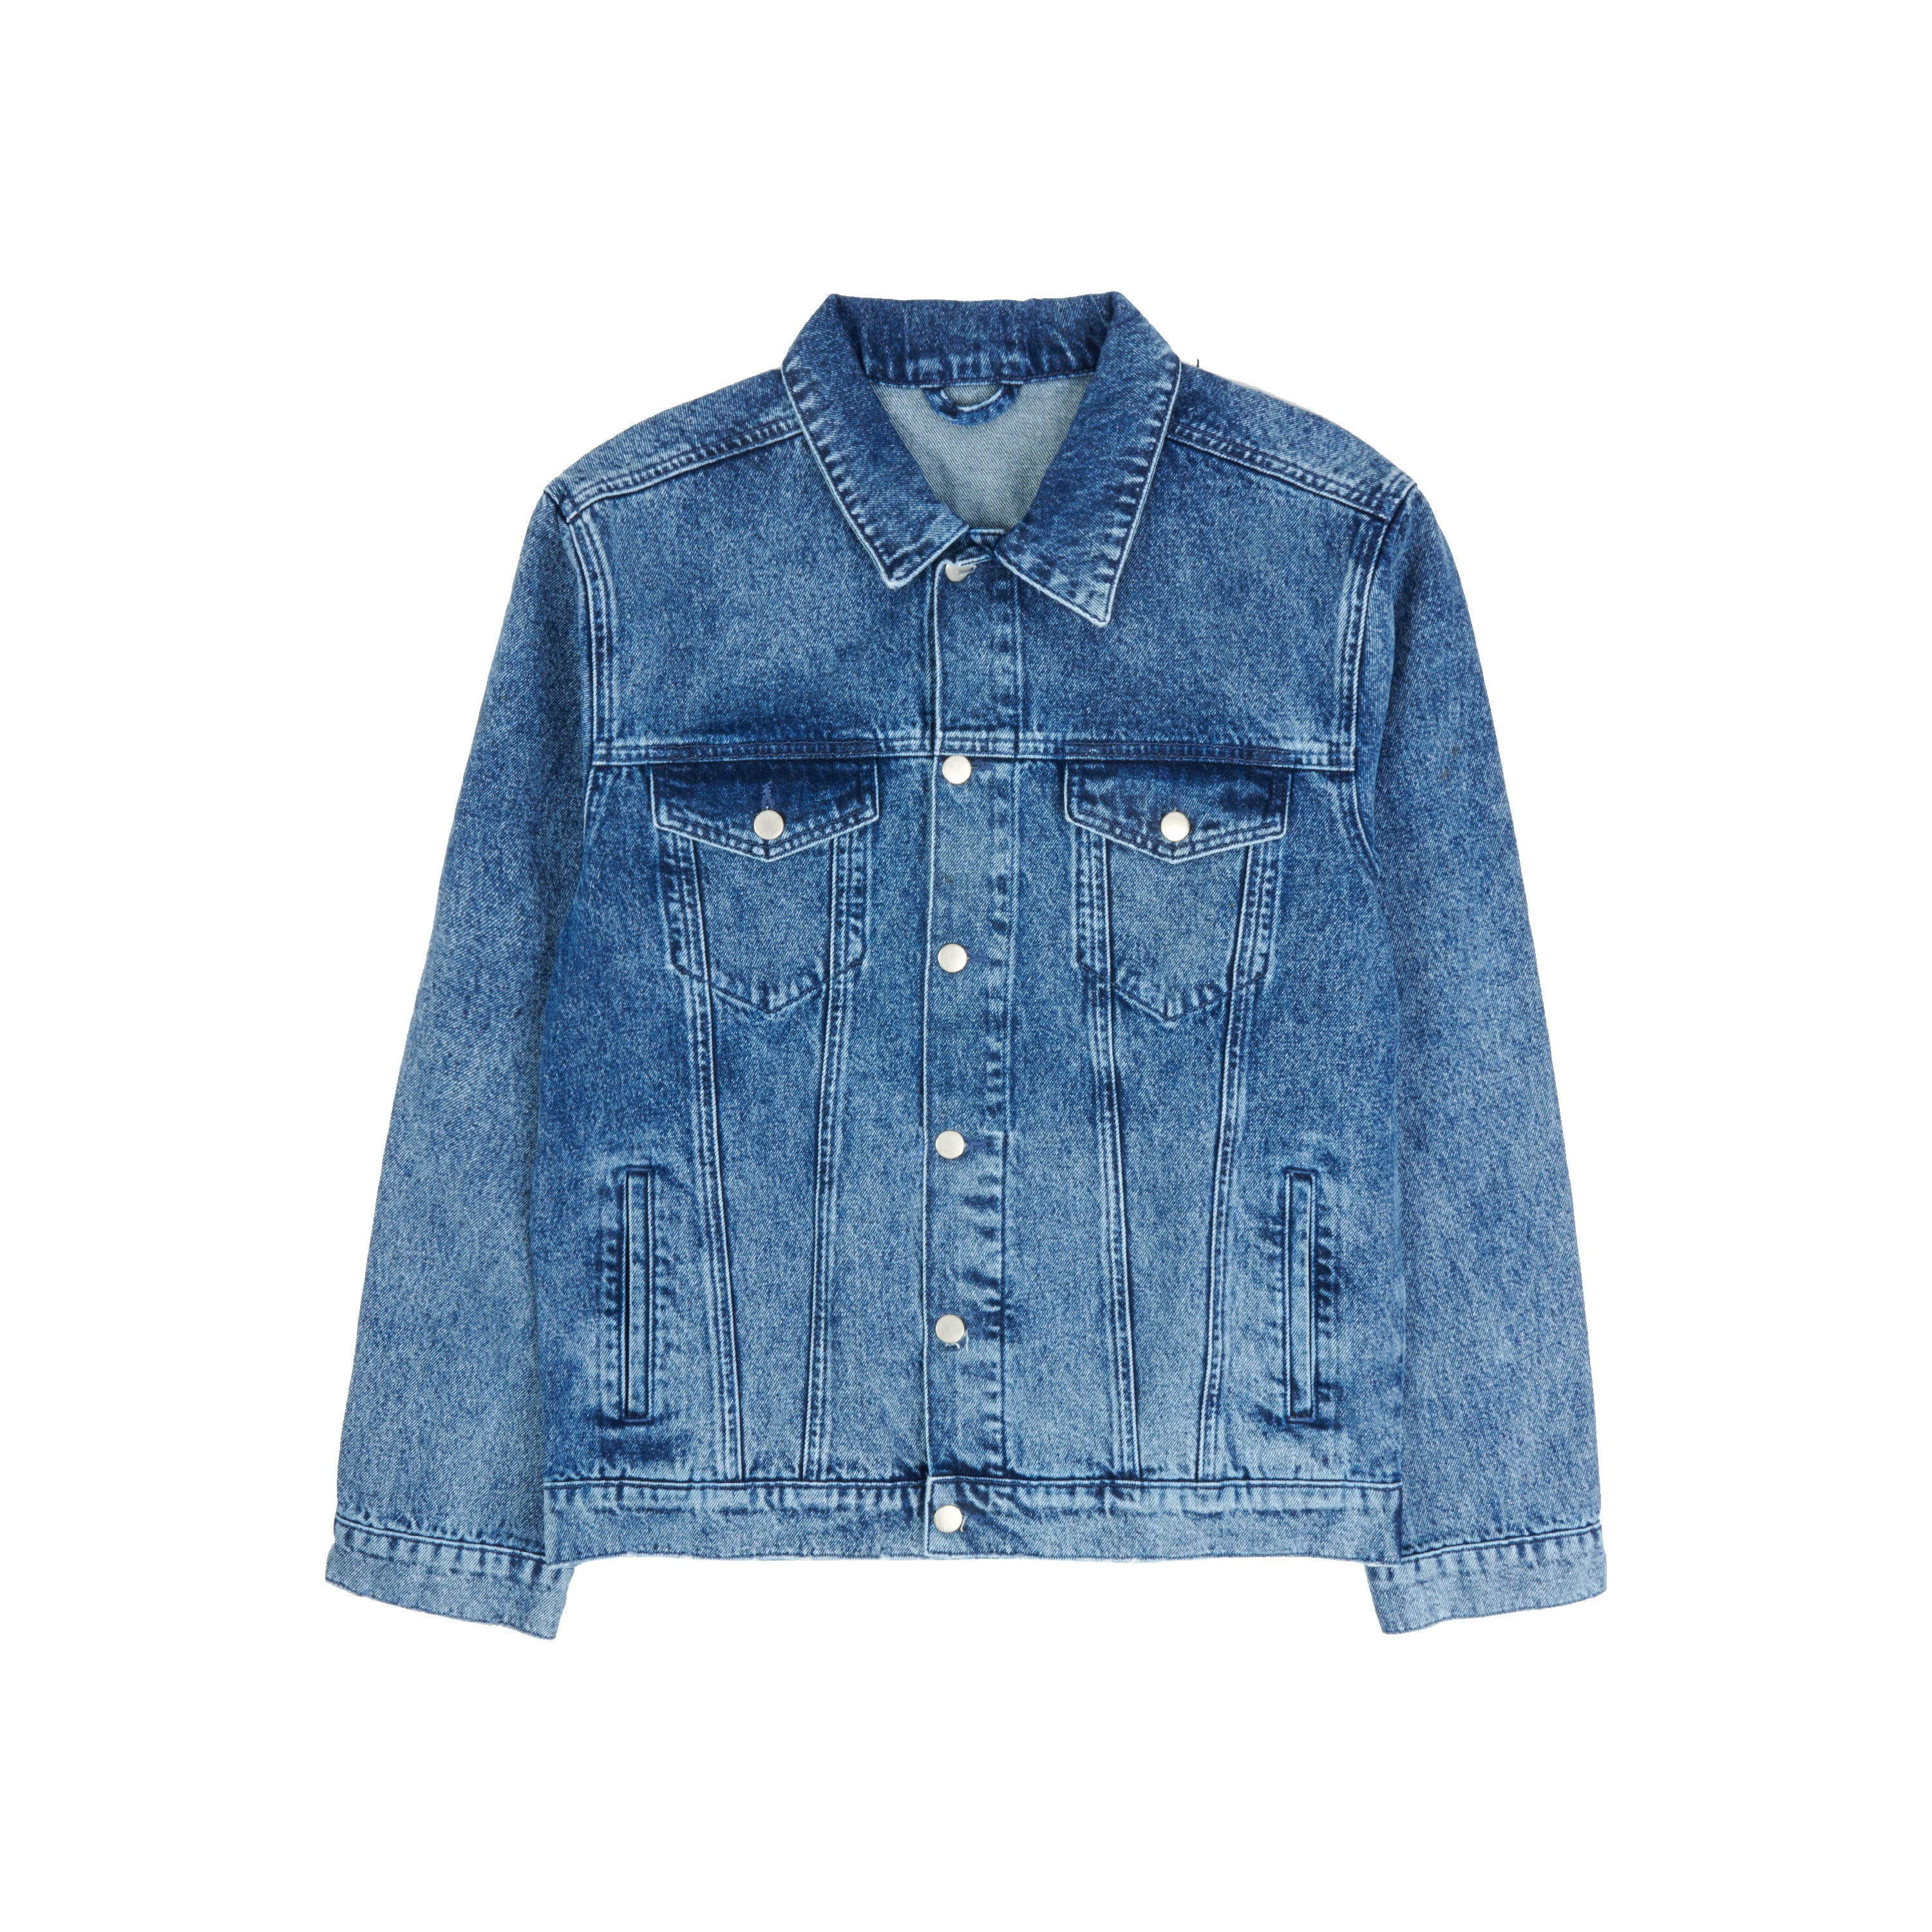 RS No. 9 Carnaby - No 9 Carnaby Distressed Denim Jacket II